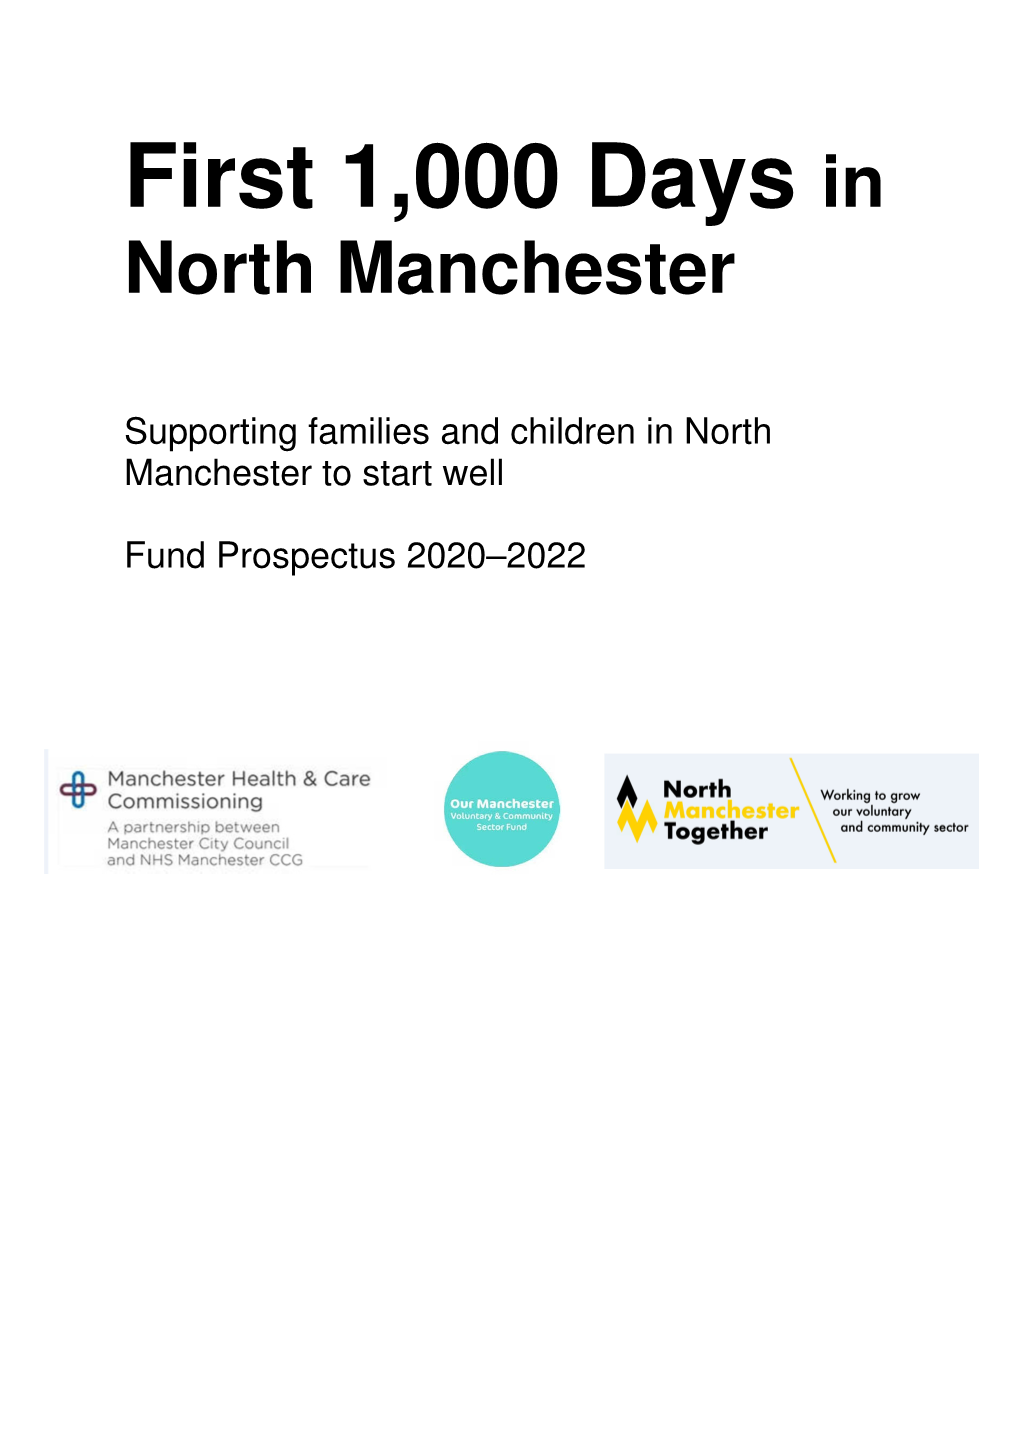 First 1000 Days in North Manchester Prospectus 2020